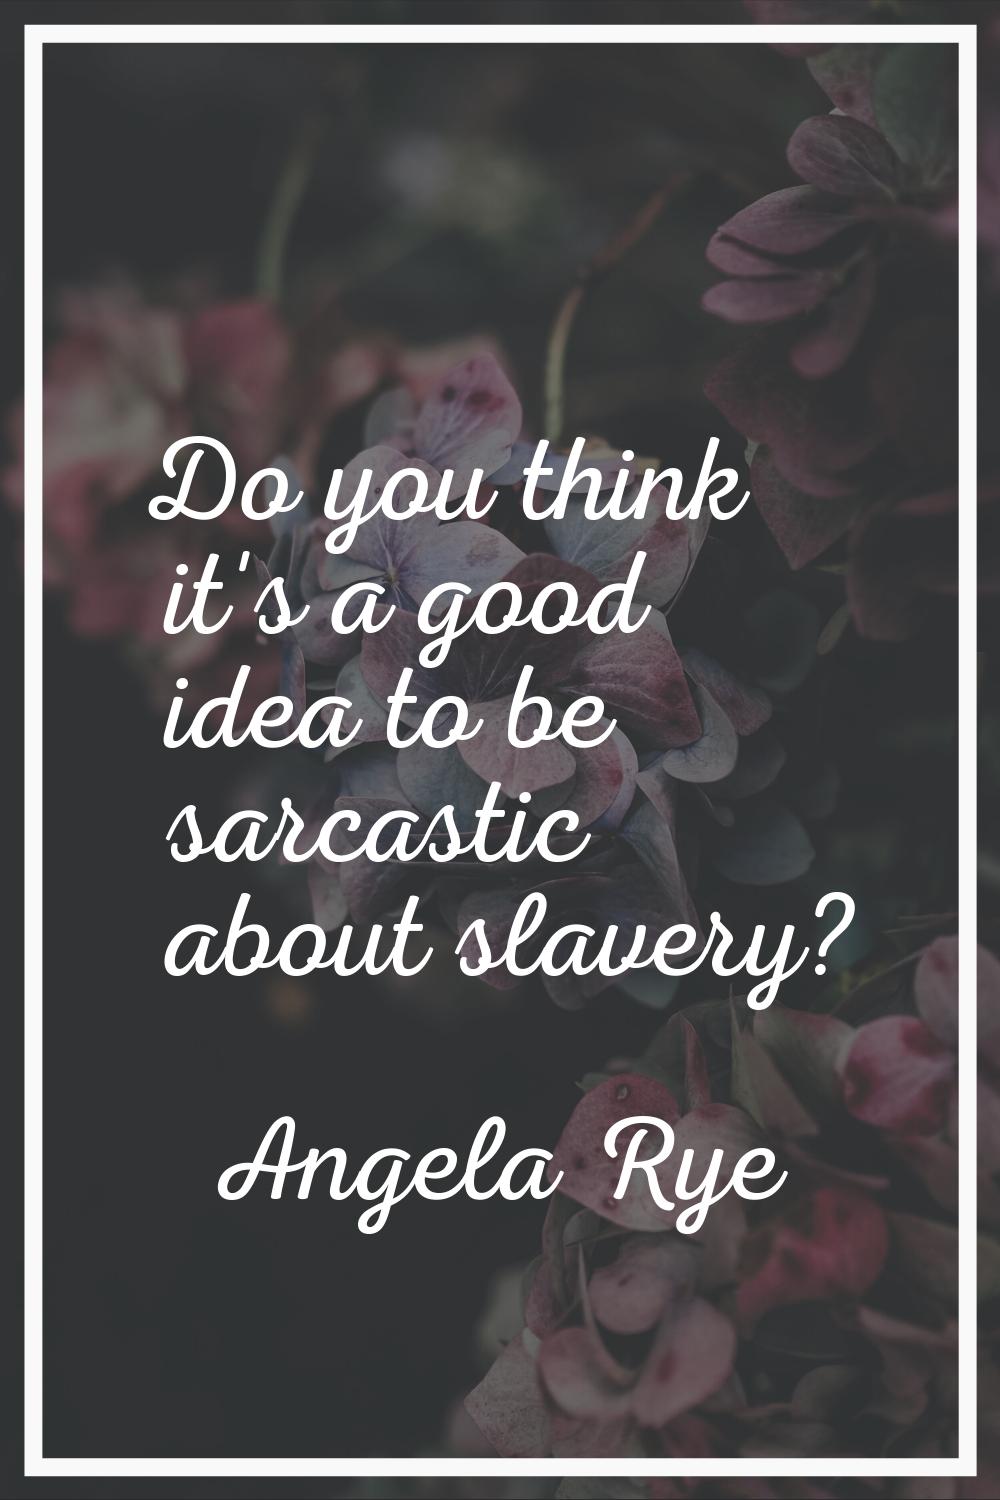 Do you think it's a good idea to be sarcastic about slavery?